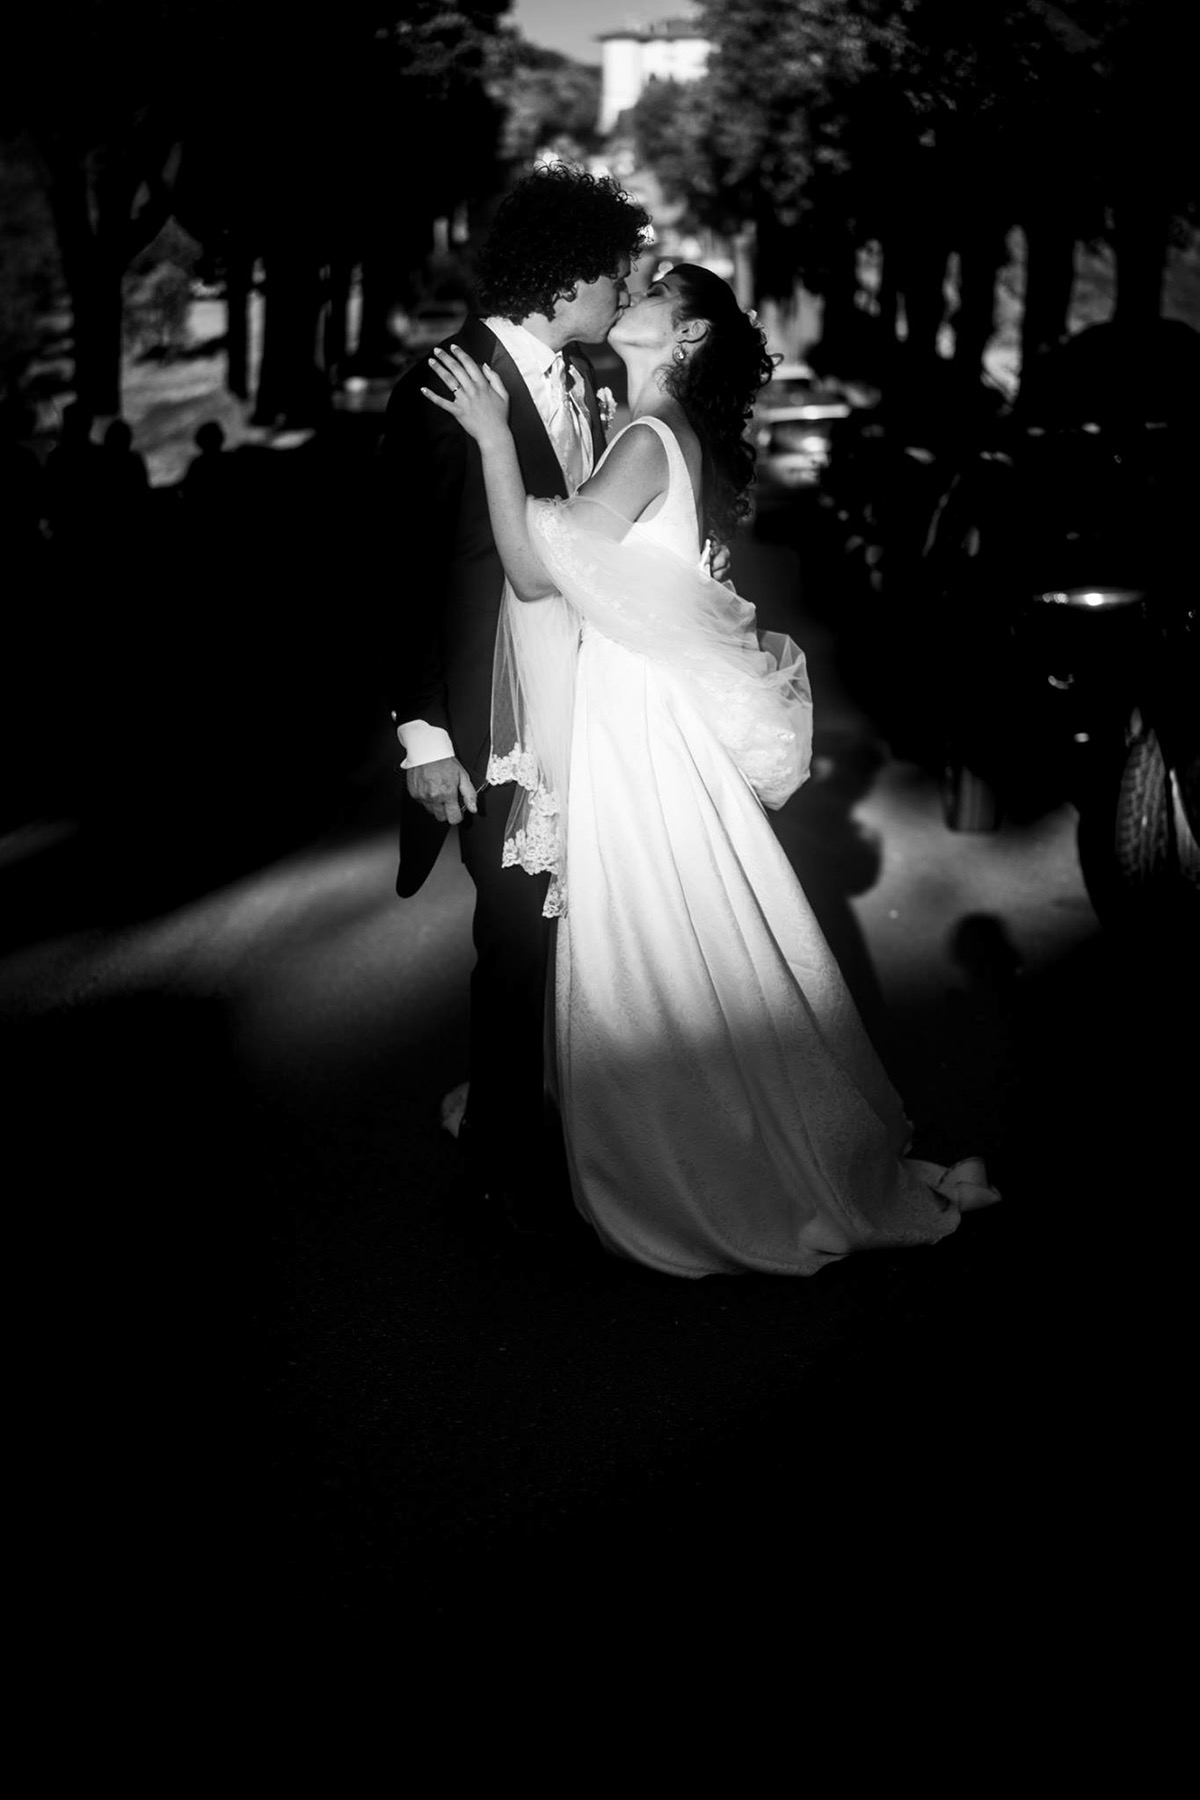 wedding Photography  black and white bw photo Love moment capture people